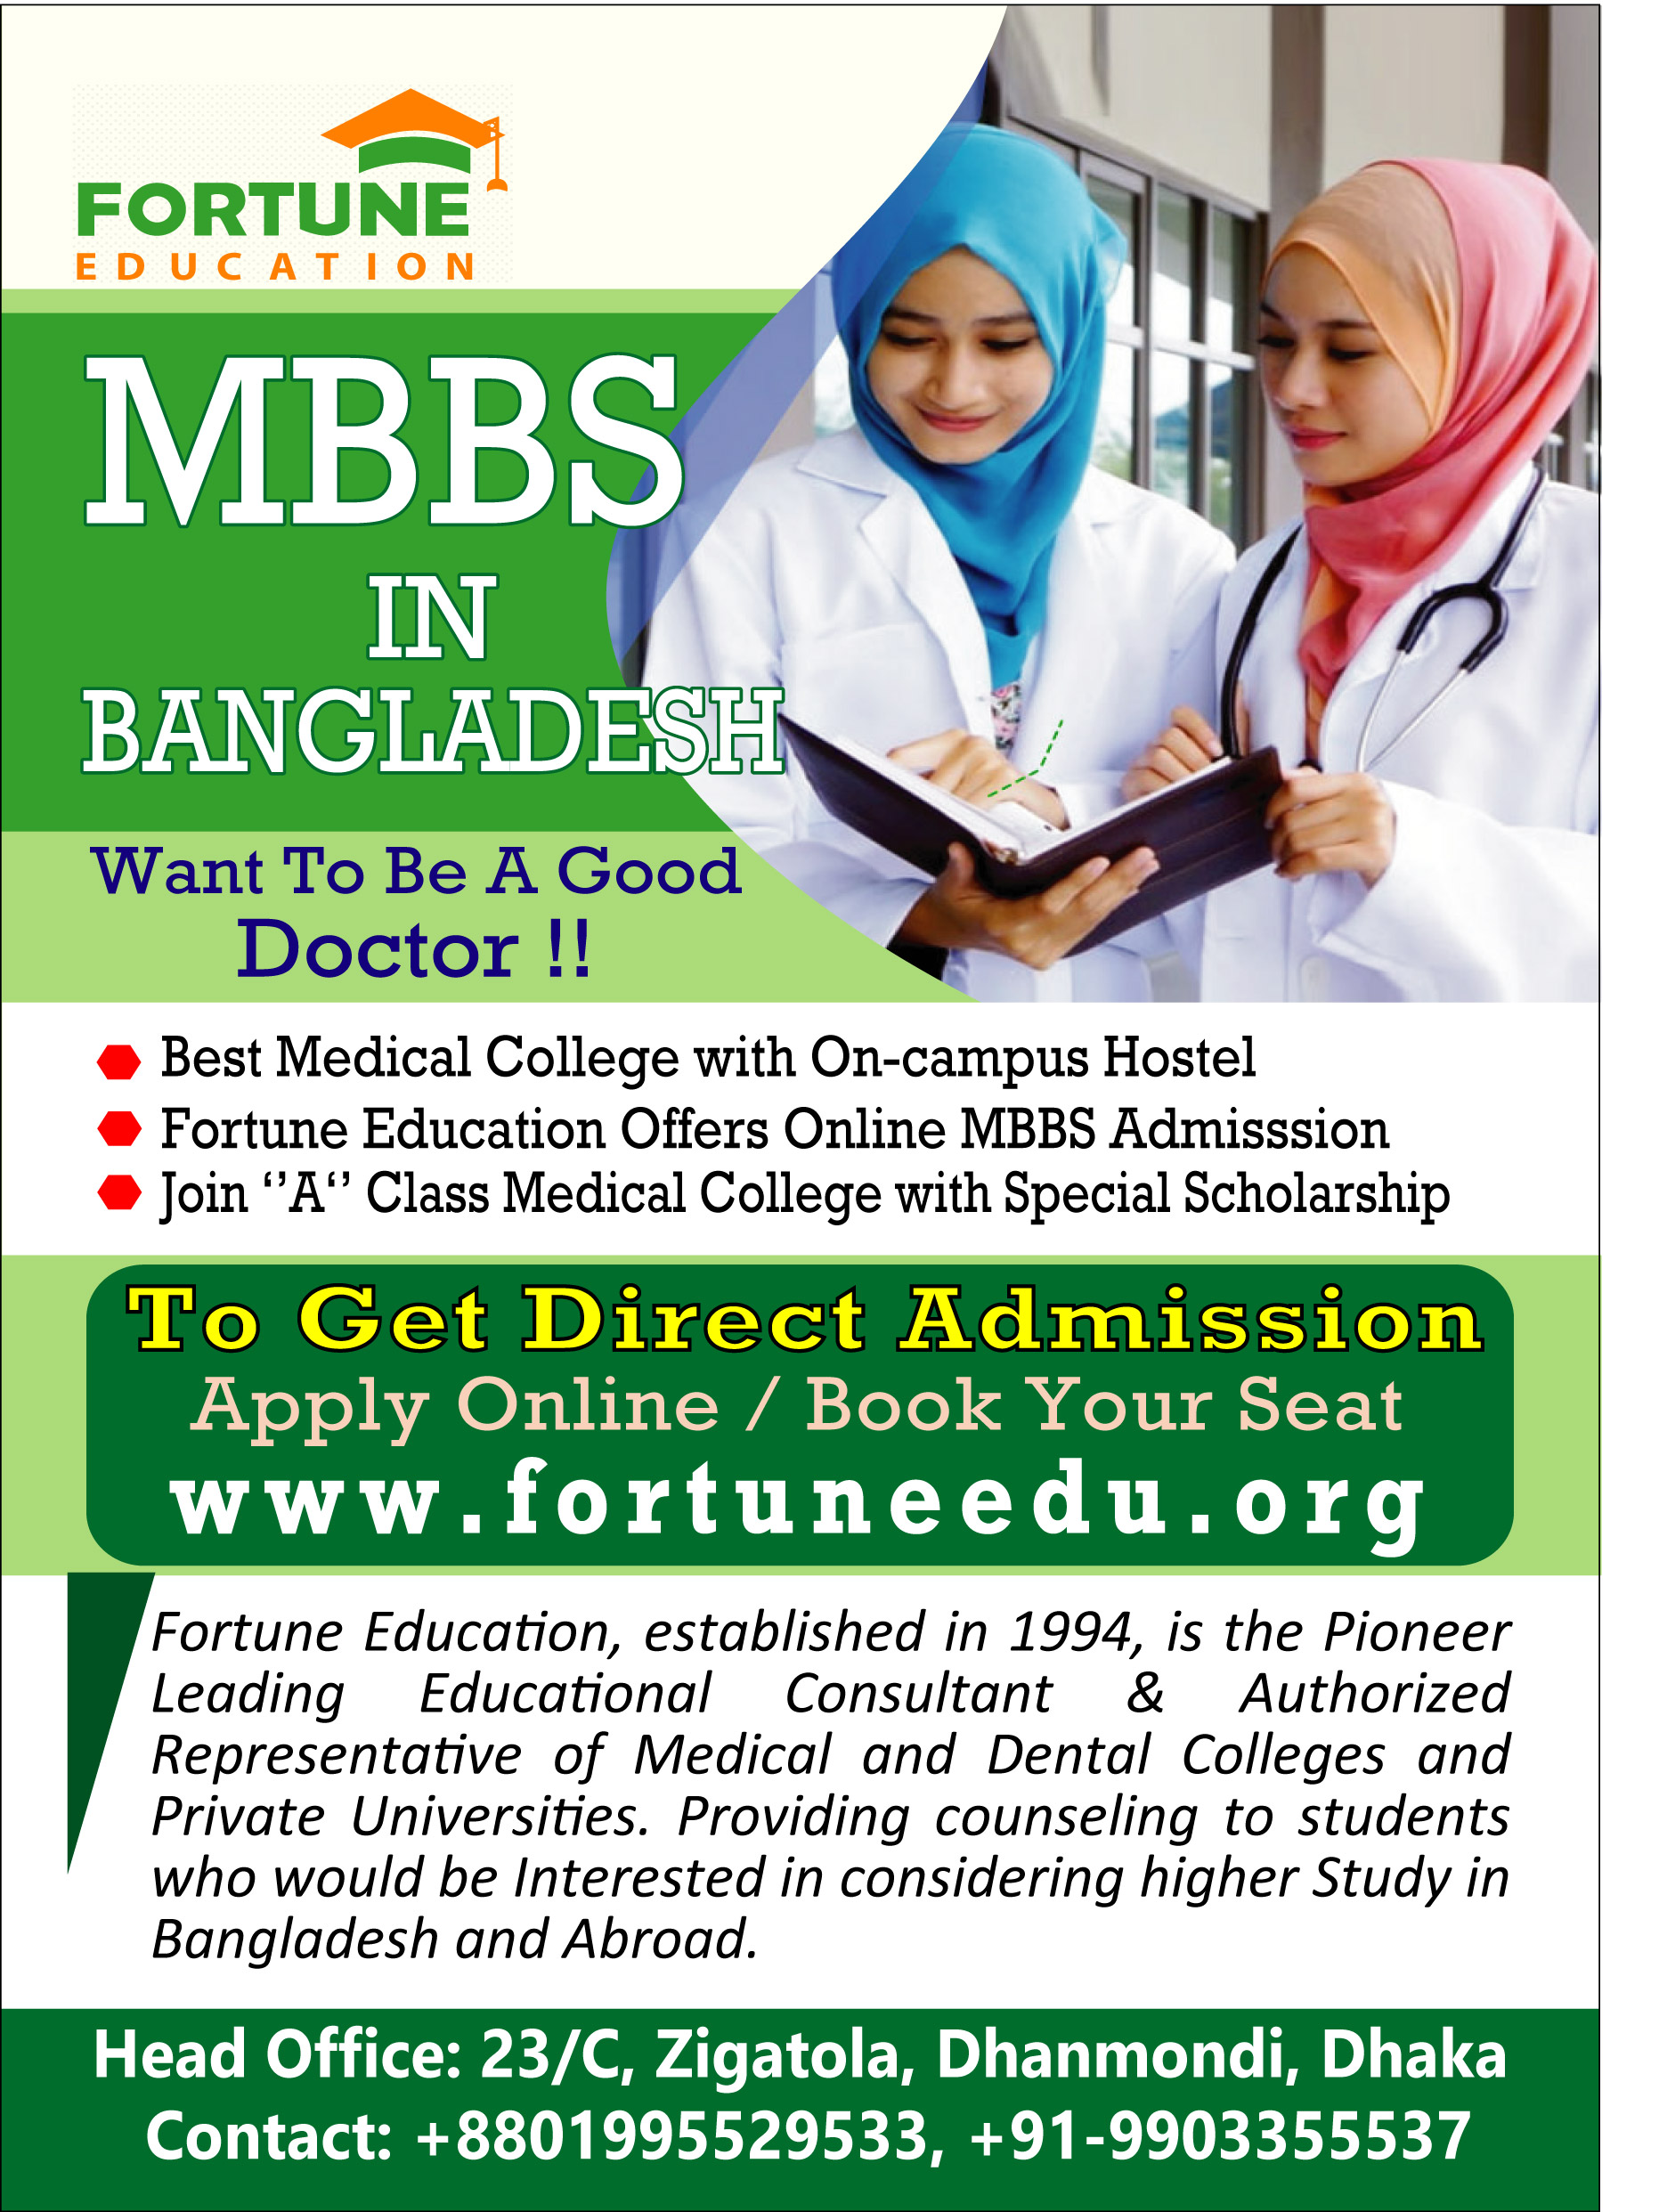 AUTHORIZED REPRESENTATIVE OF PRIVATE MEDICAL COLLEGES IN BANGLADESH